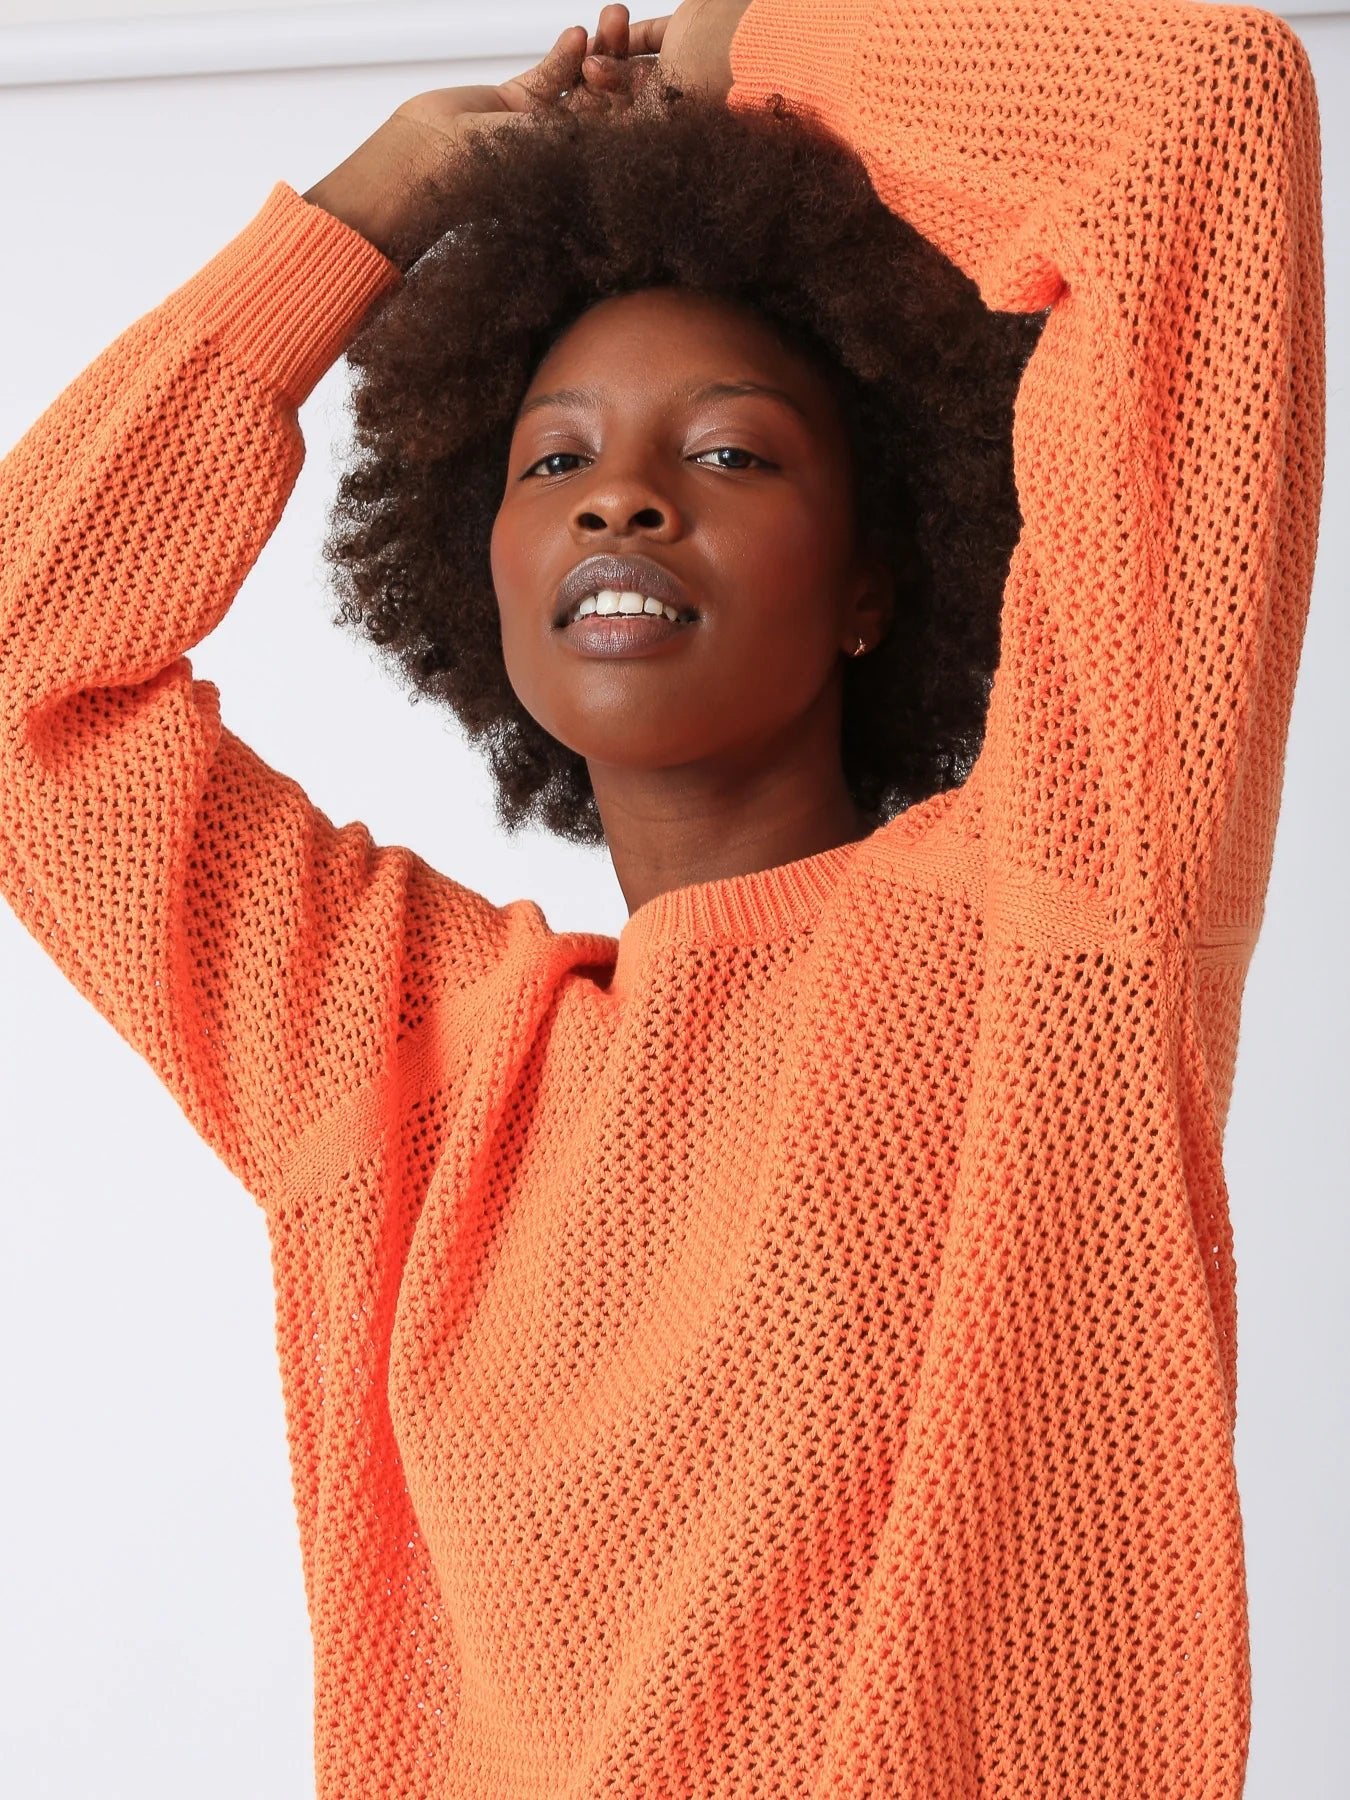 Chloe Sweater Tangerine - Electric & Rose - Color Game